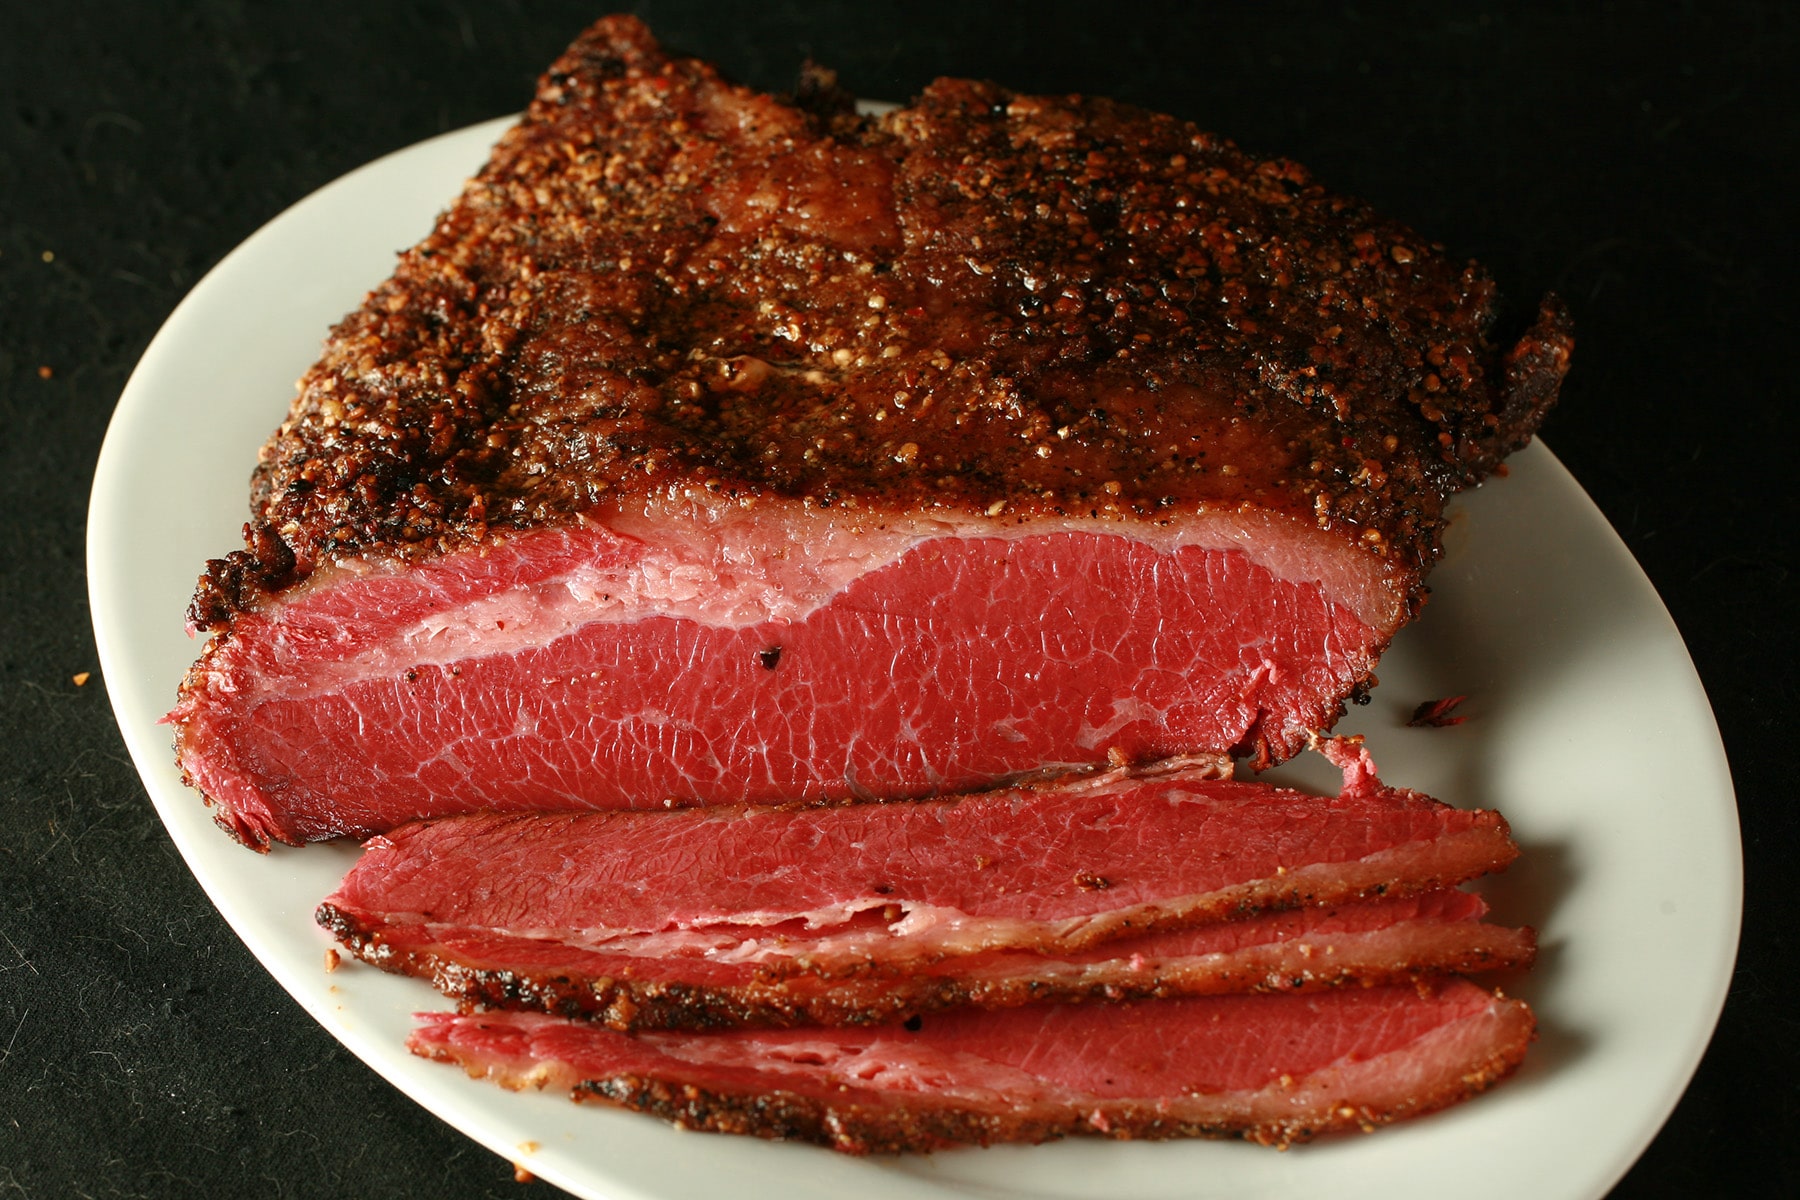 A large slab of Montreal Smoked Meat on a white plate. Several slices have been cut from the end in the foreground, revealing a bright red meat.